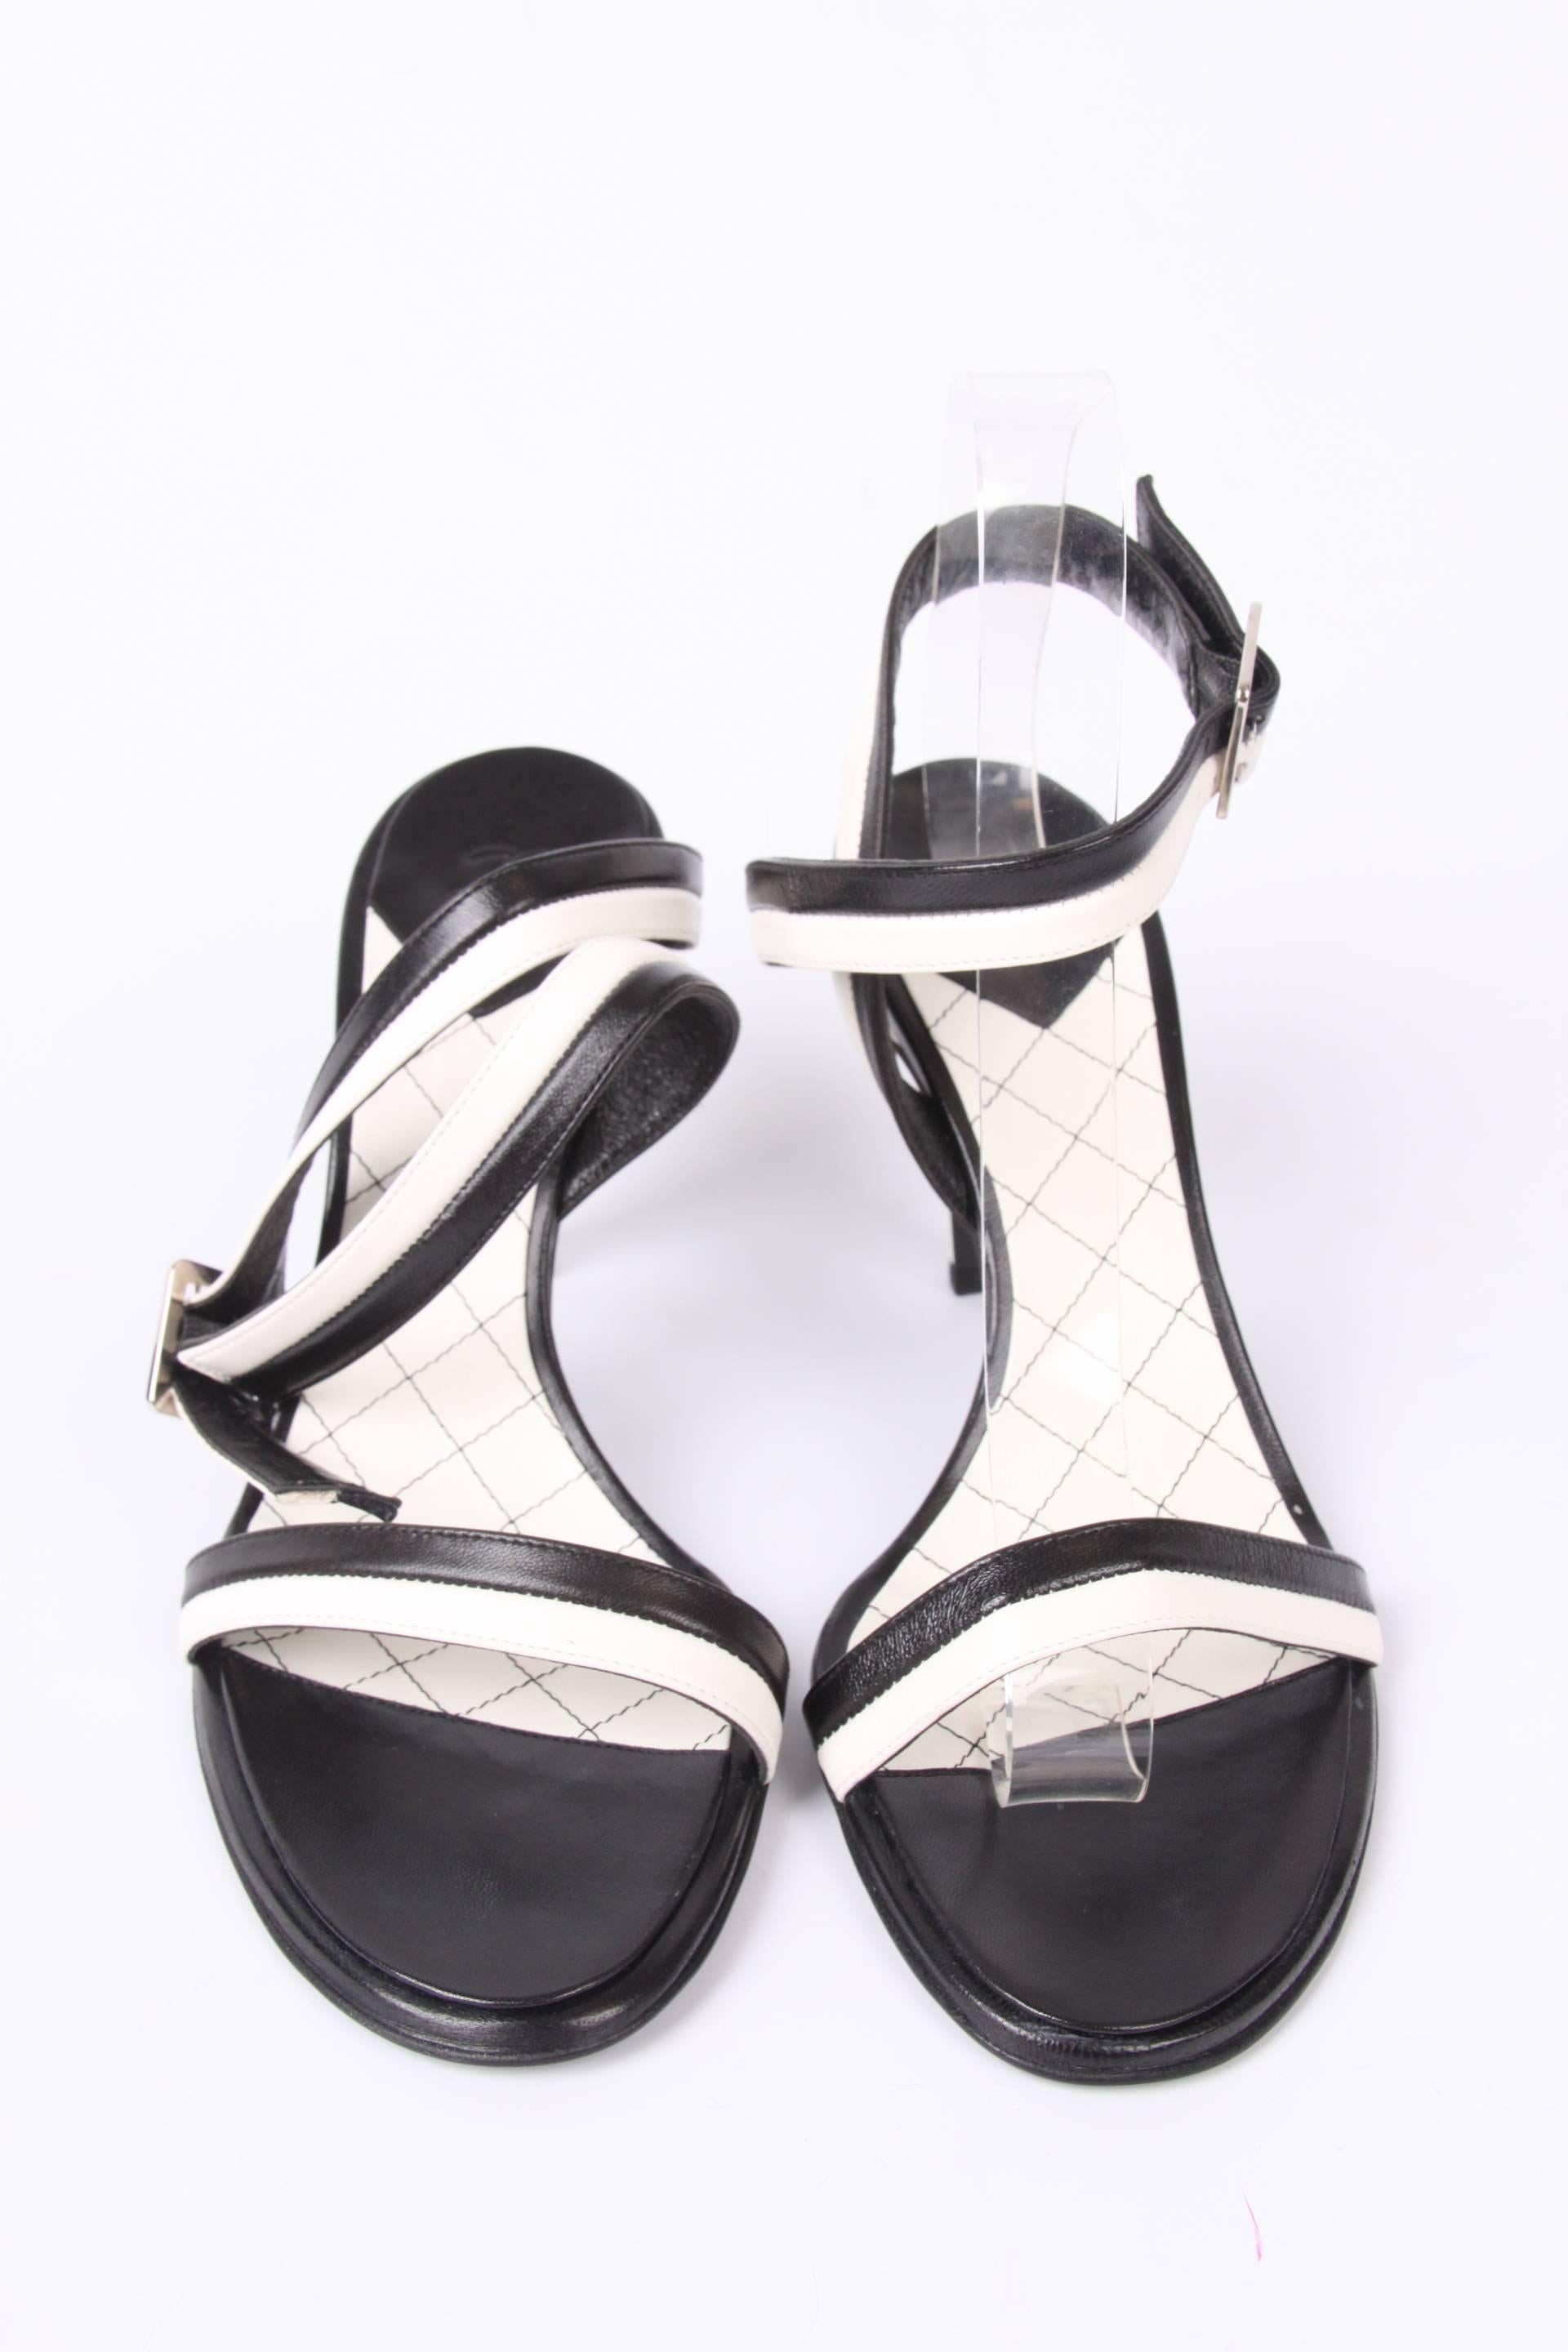 Chanel Leather High Heel Sandalettes - black & white In New Condition For Sale In Baarn, NL